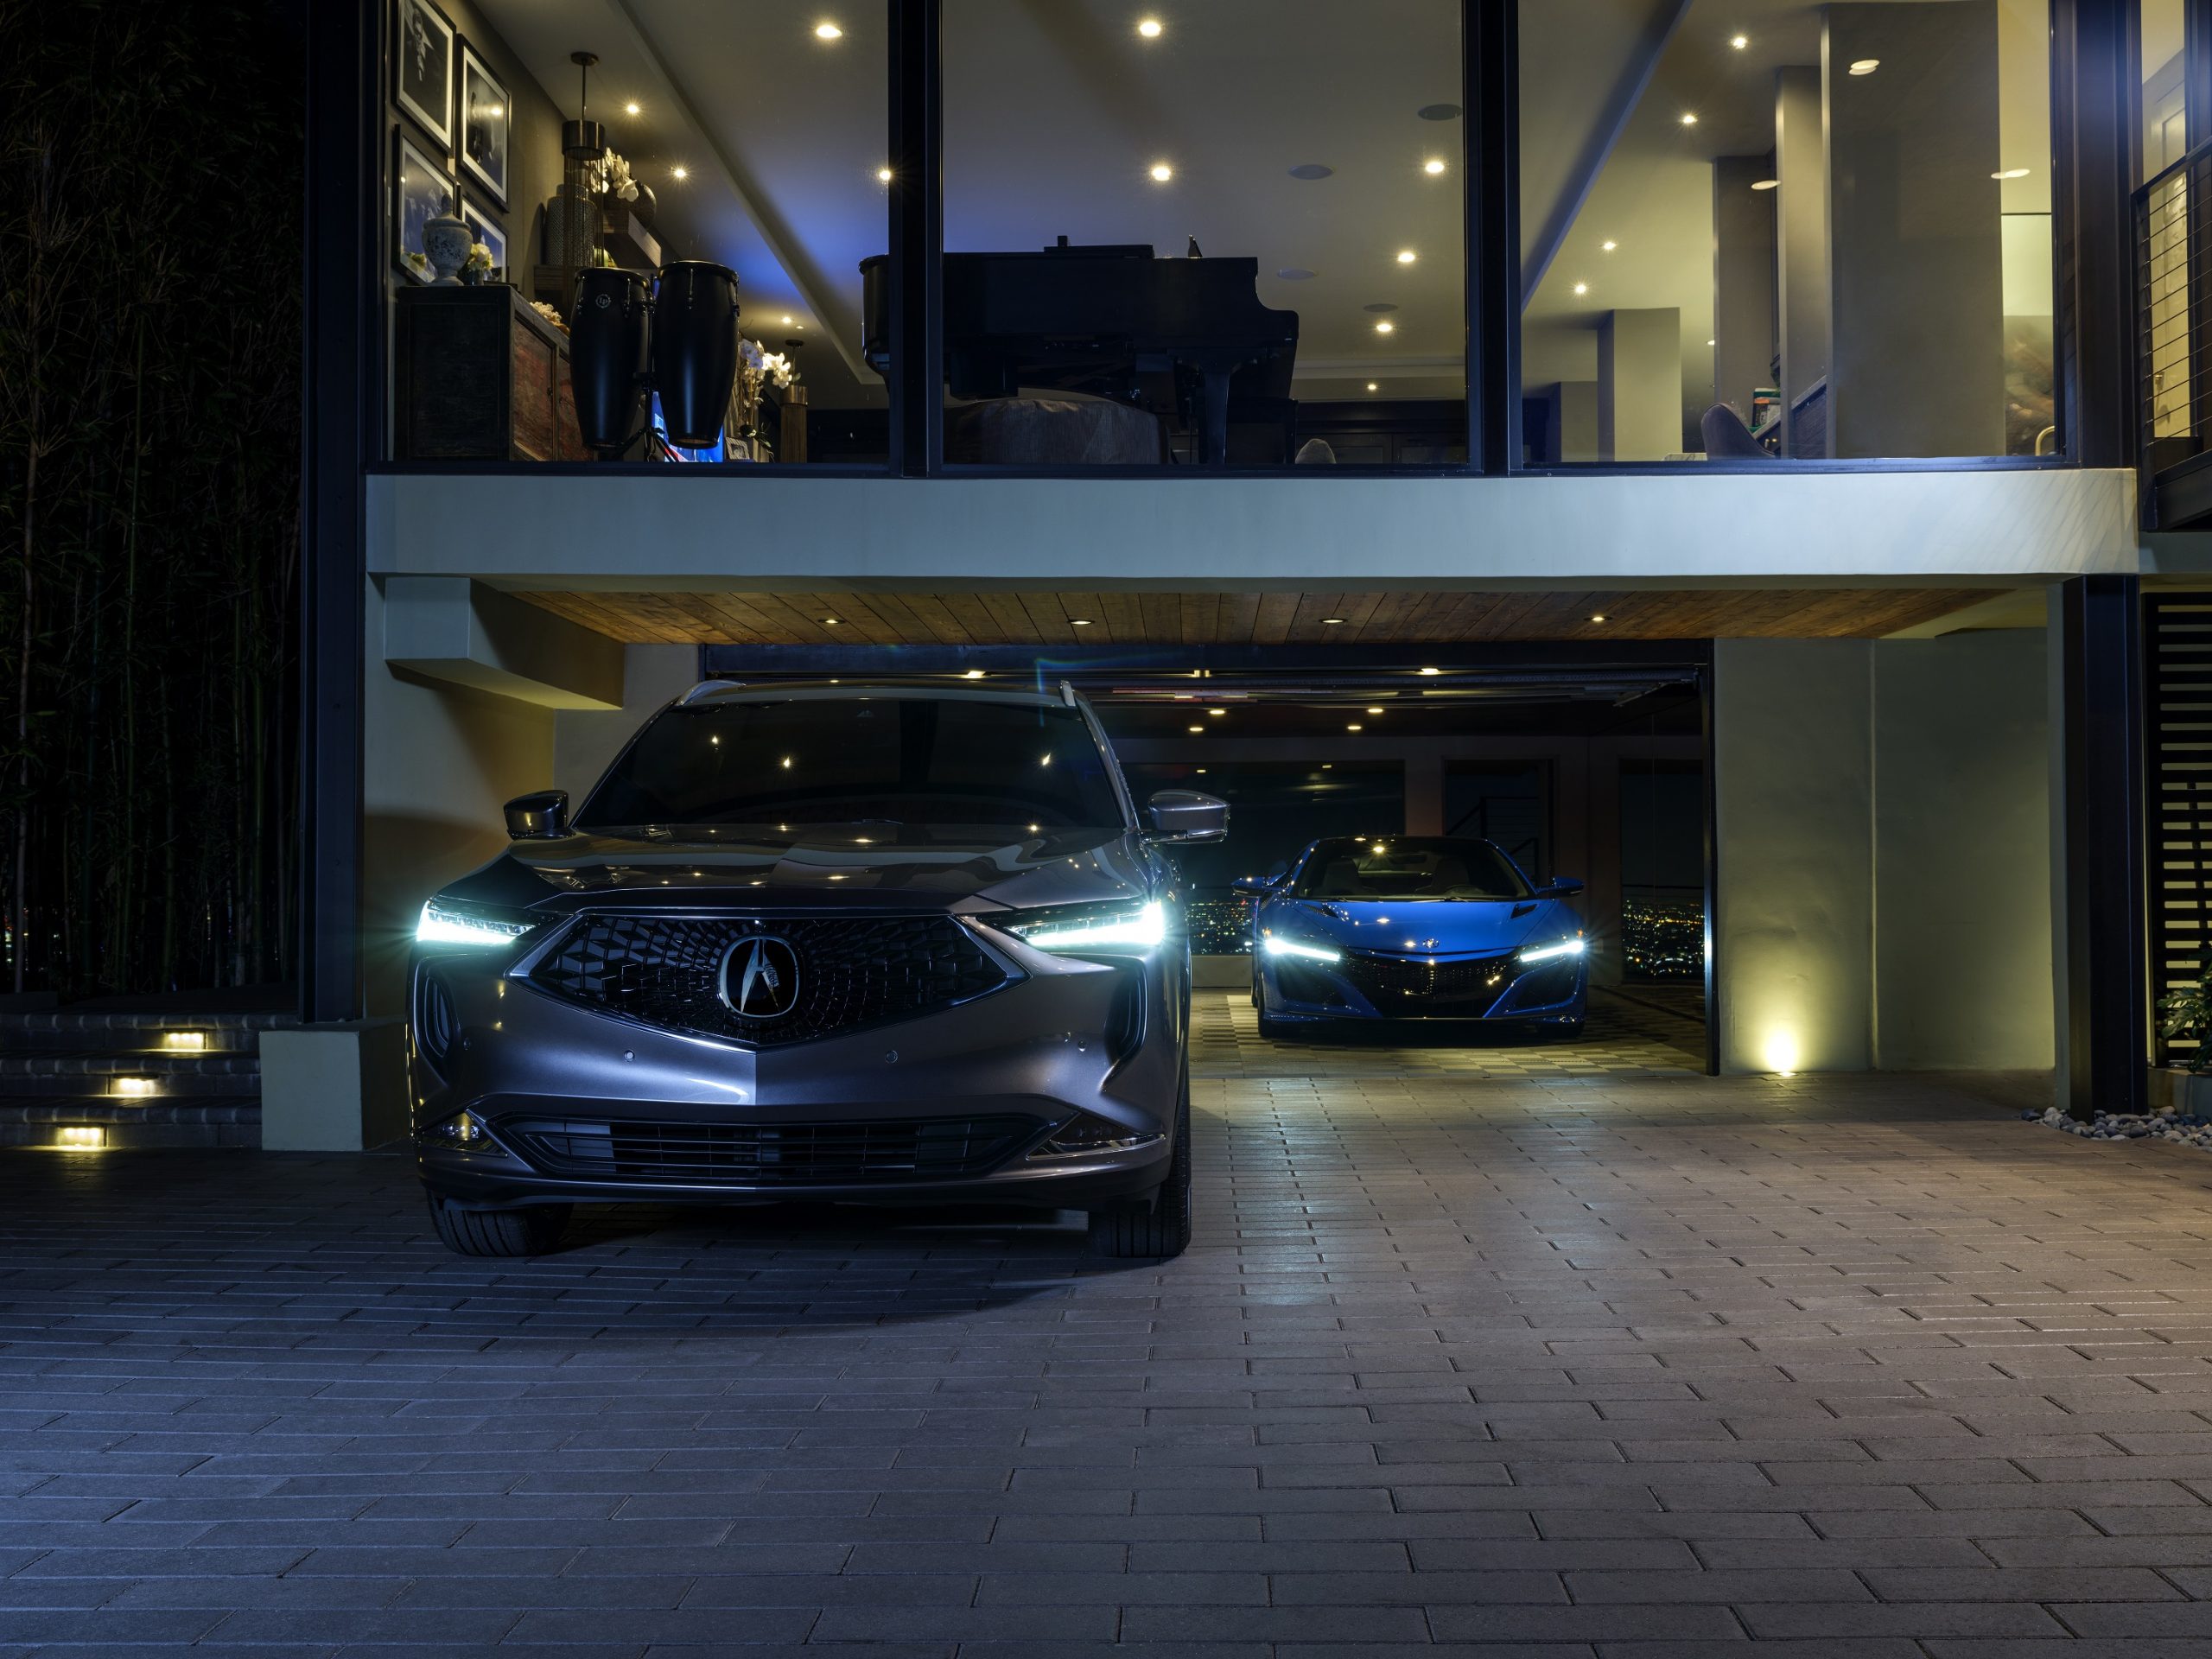 A grey Acura MDX hybrid and an Acura NSX shot at night